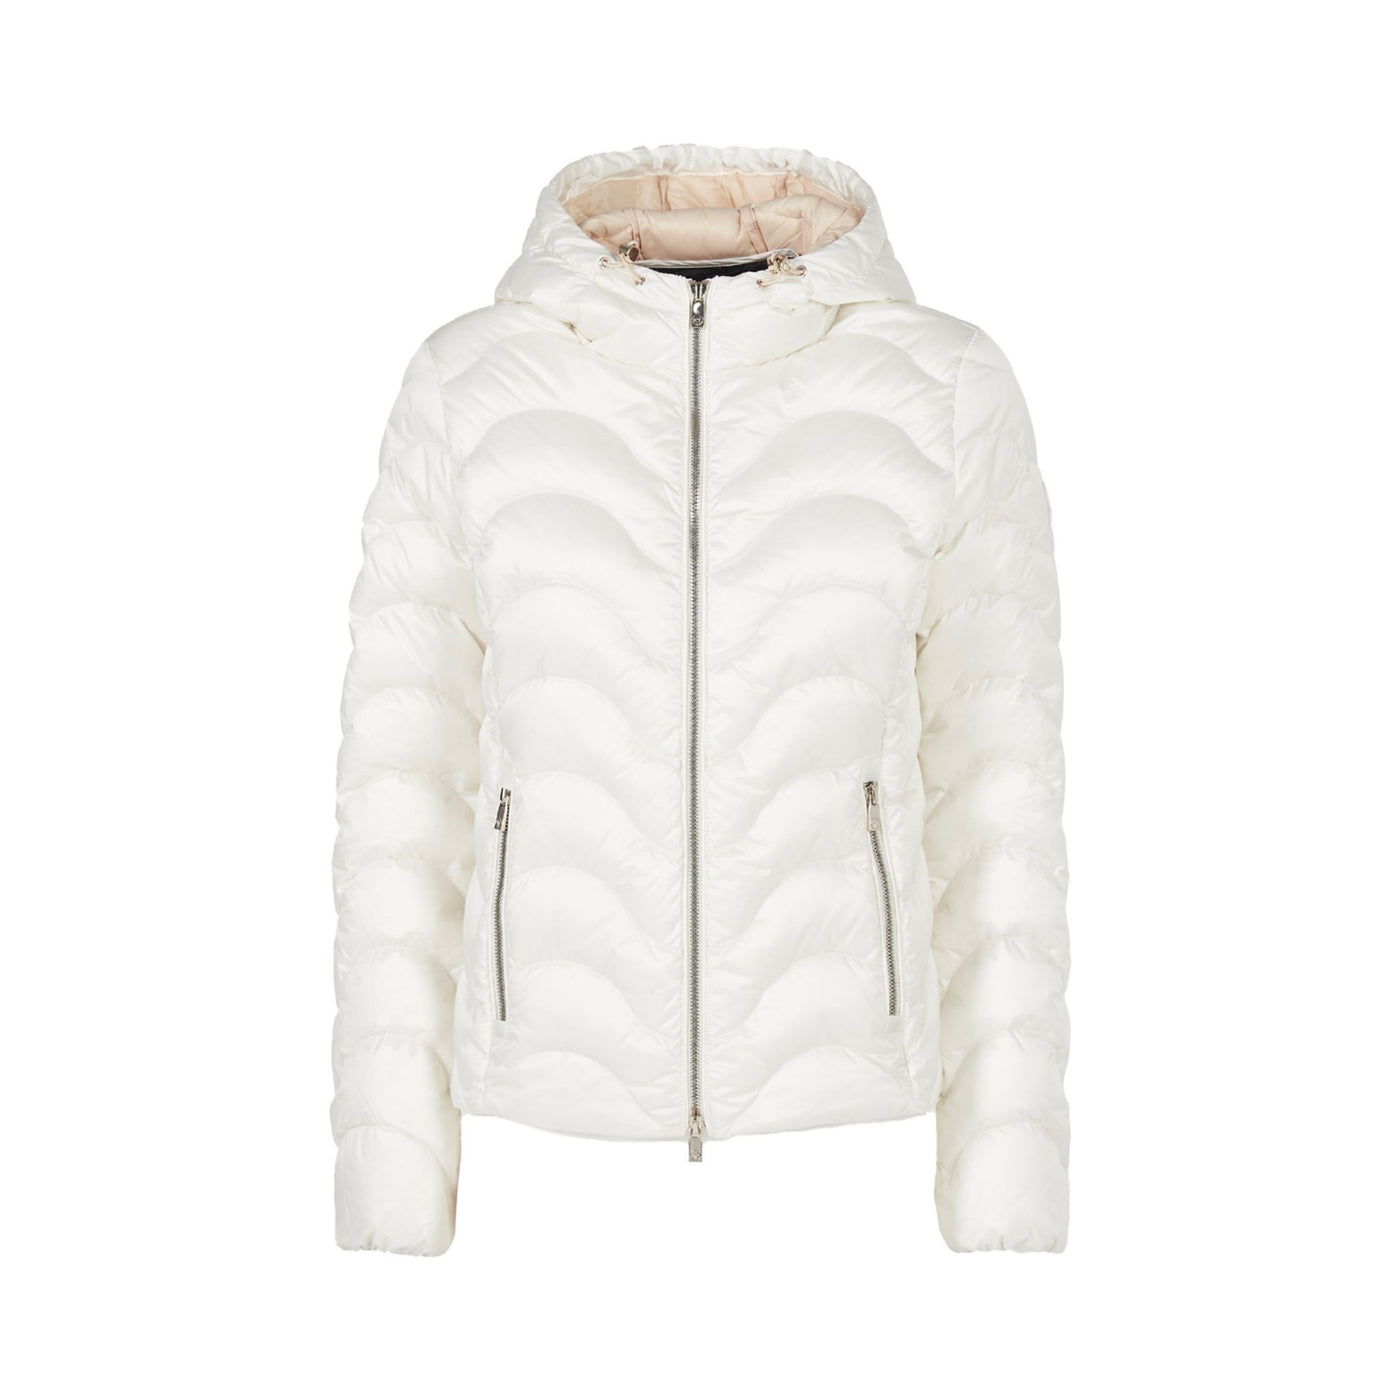 Women's solid color quilted jacket